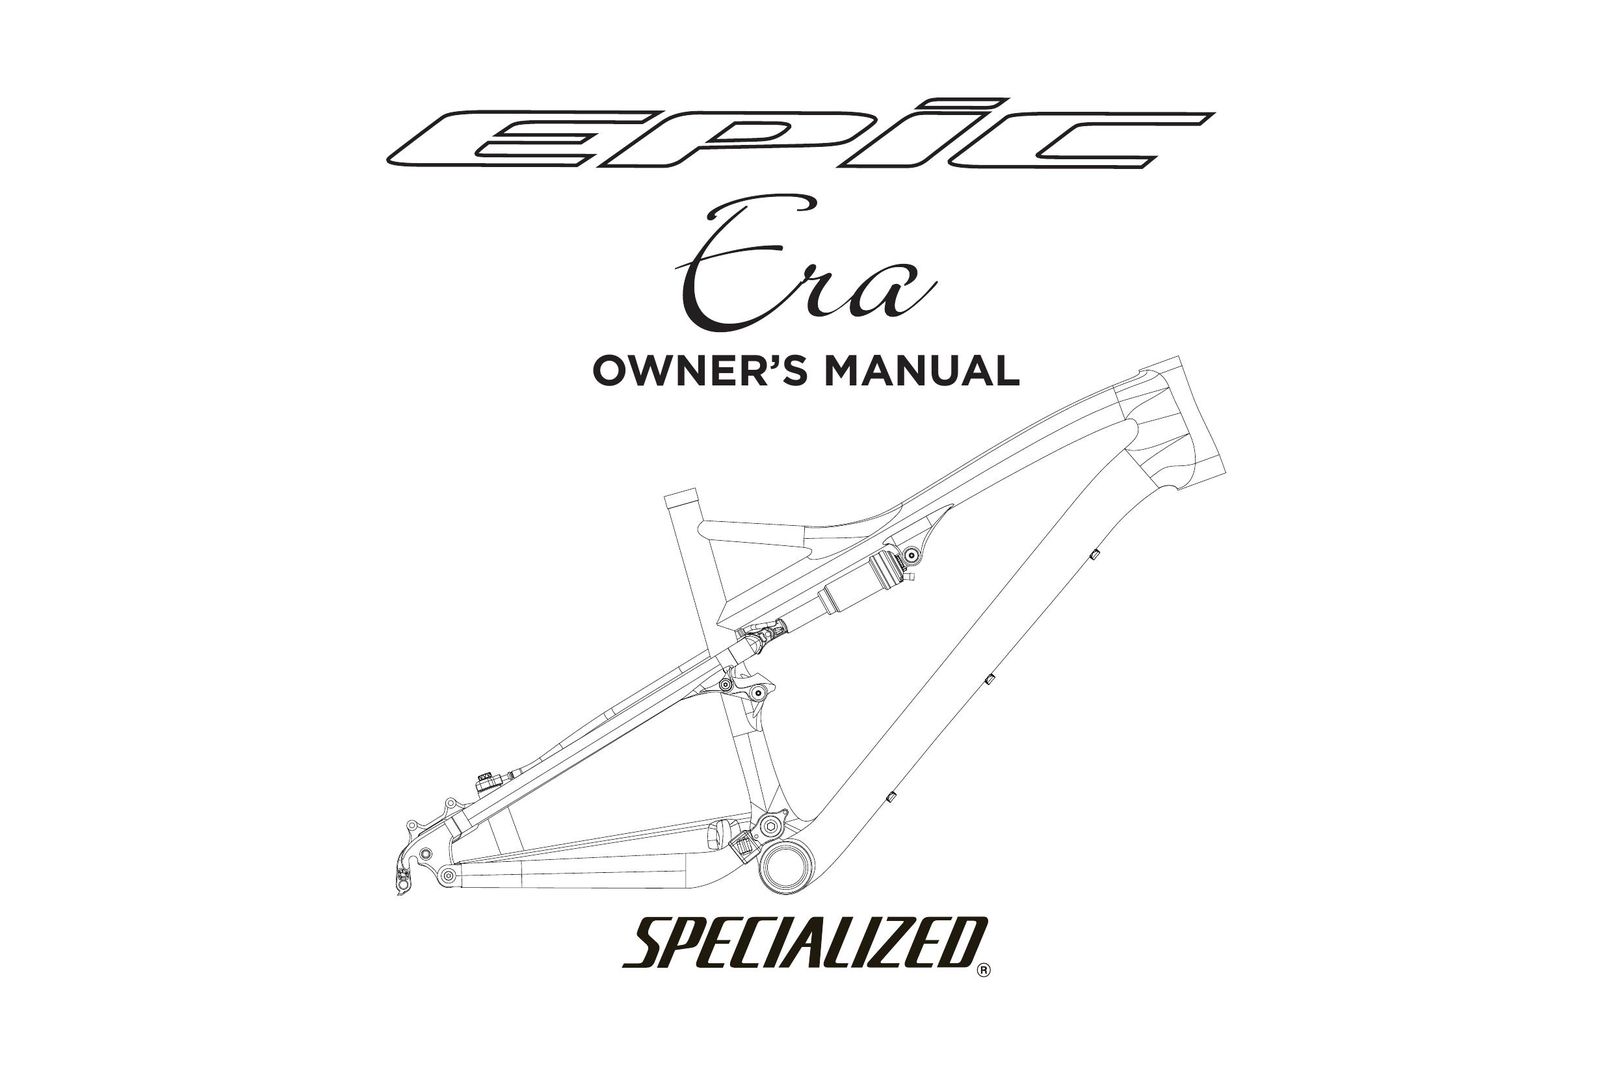 Specialized Era Fitness Equipment User Manual